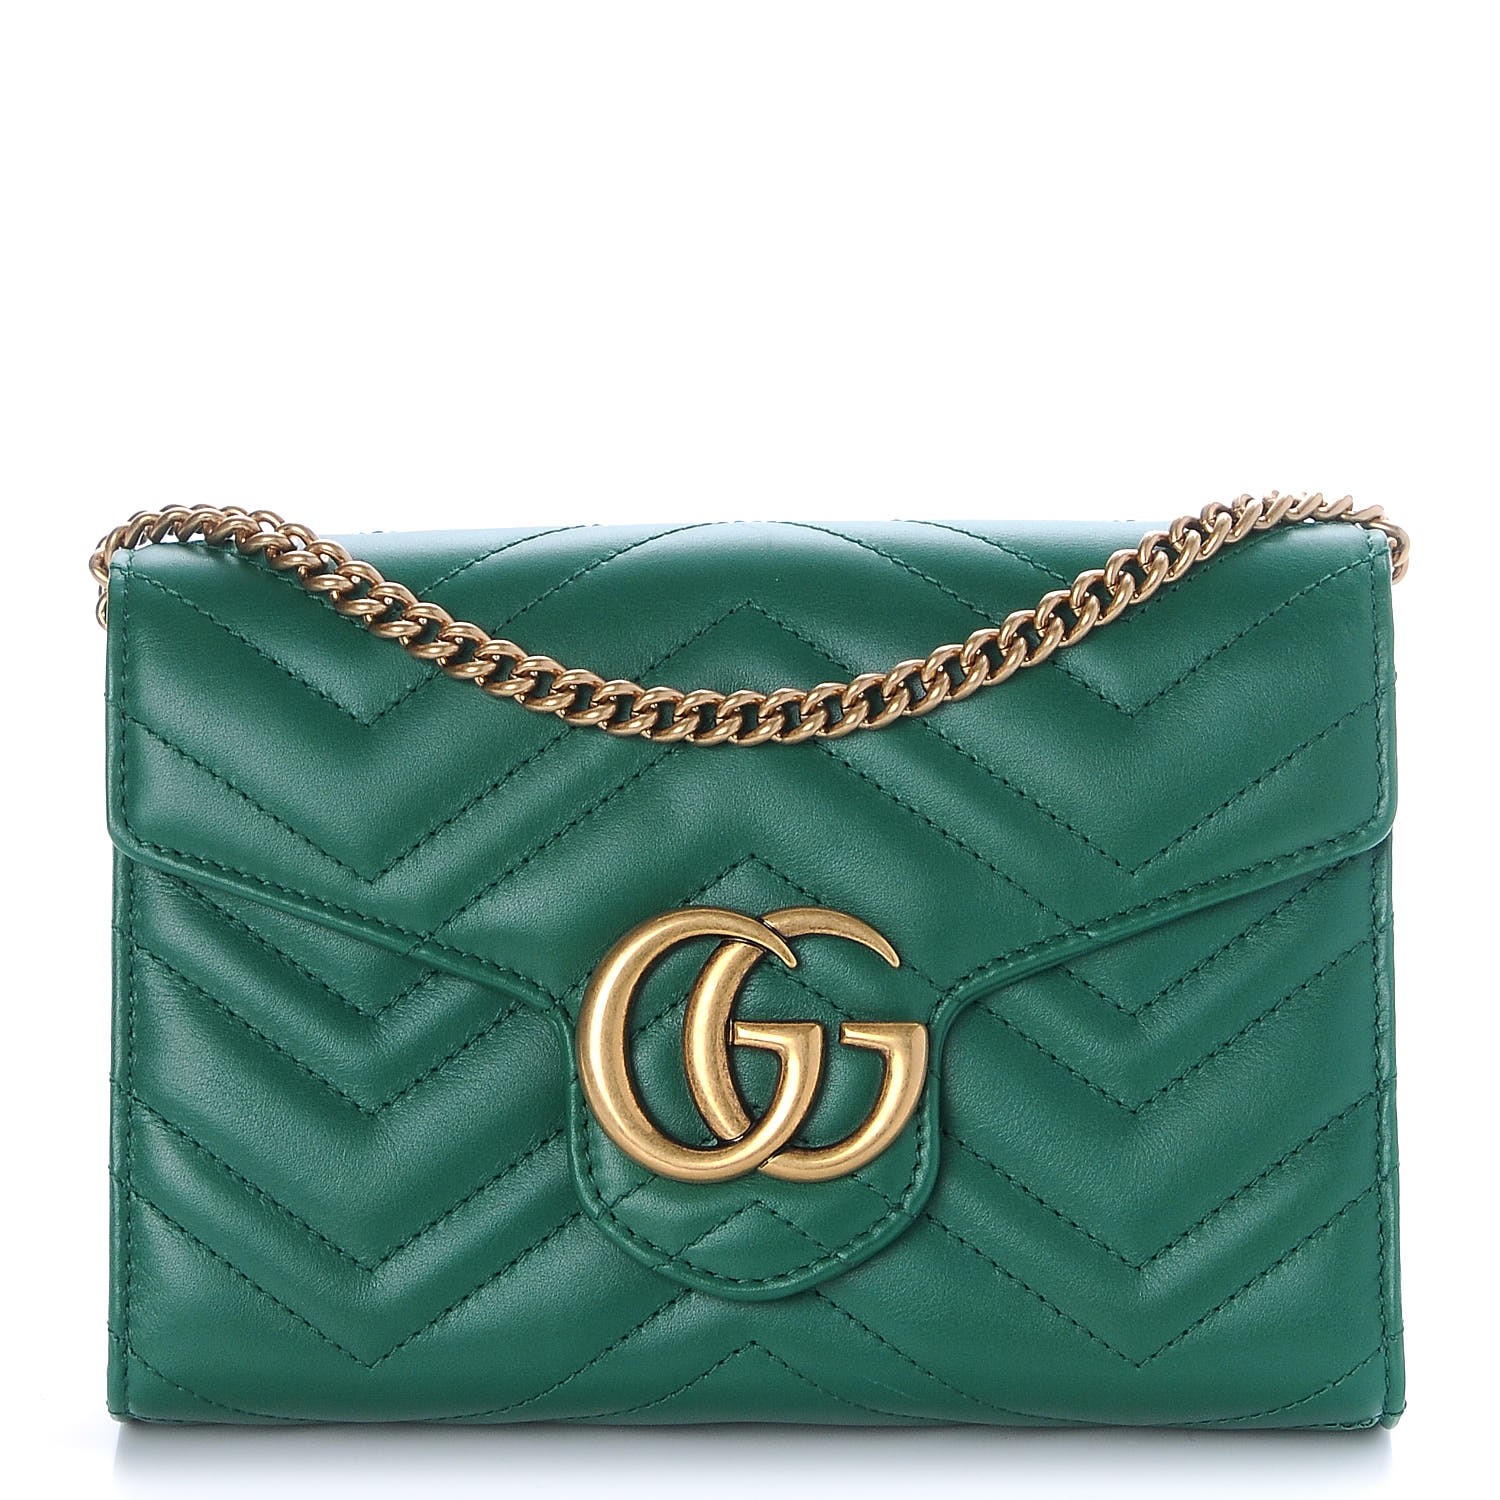 gucci marmont wallet green